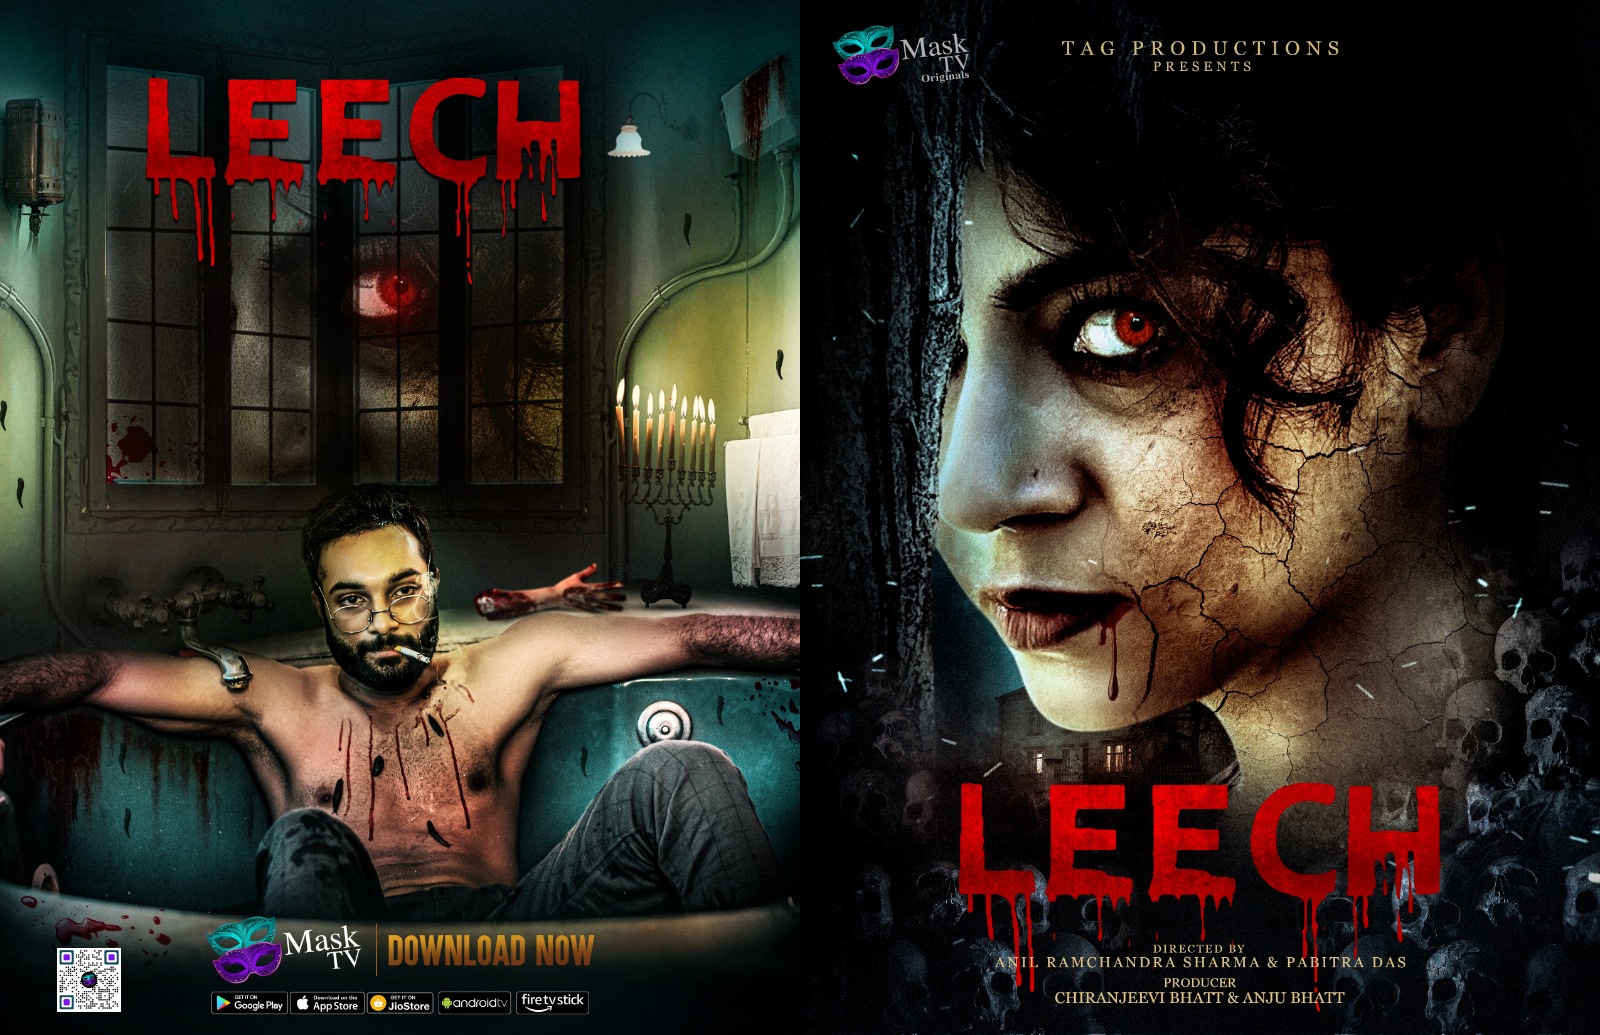 MaskTV is ready to stream INDIA ‘s first stint with Alexithymia Movie/Series Leech on 24th March